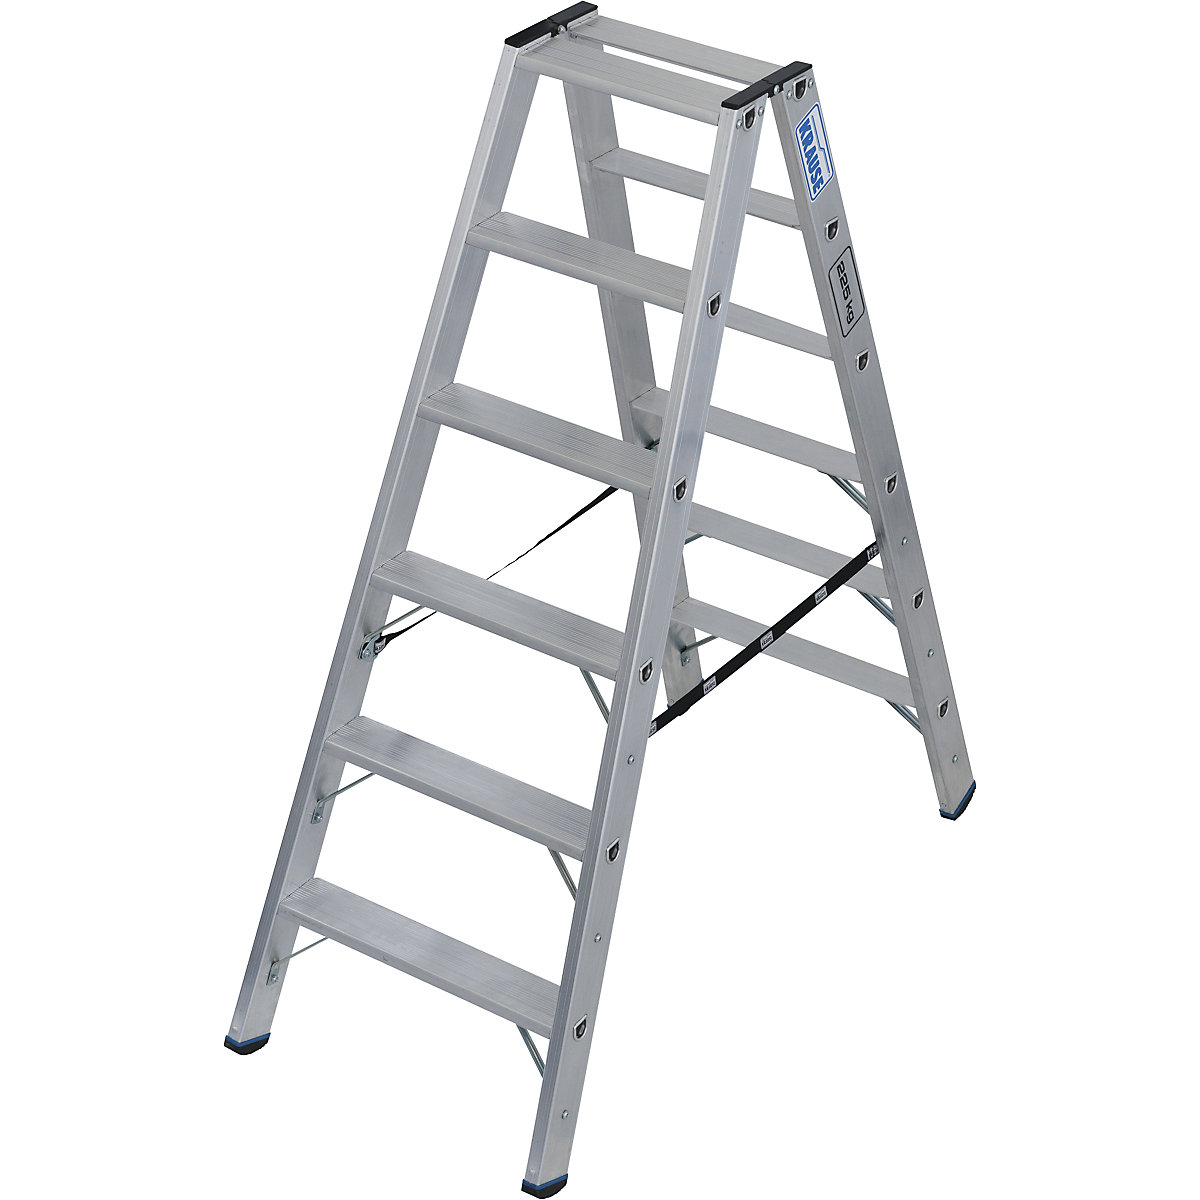 Heavy duty step ladder – KRAUSE, double sided access, up to 225 kg, 2x6 steps-1